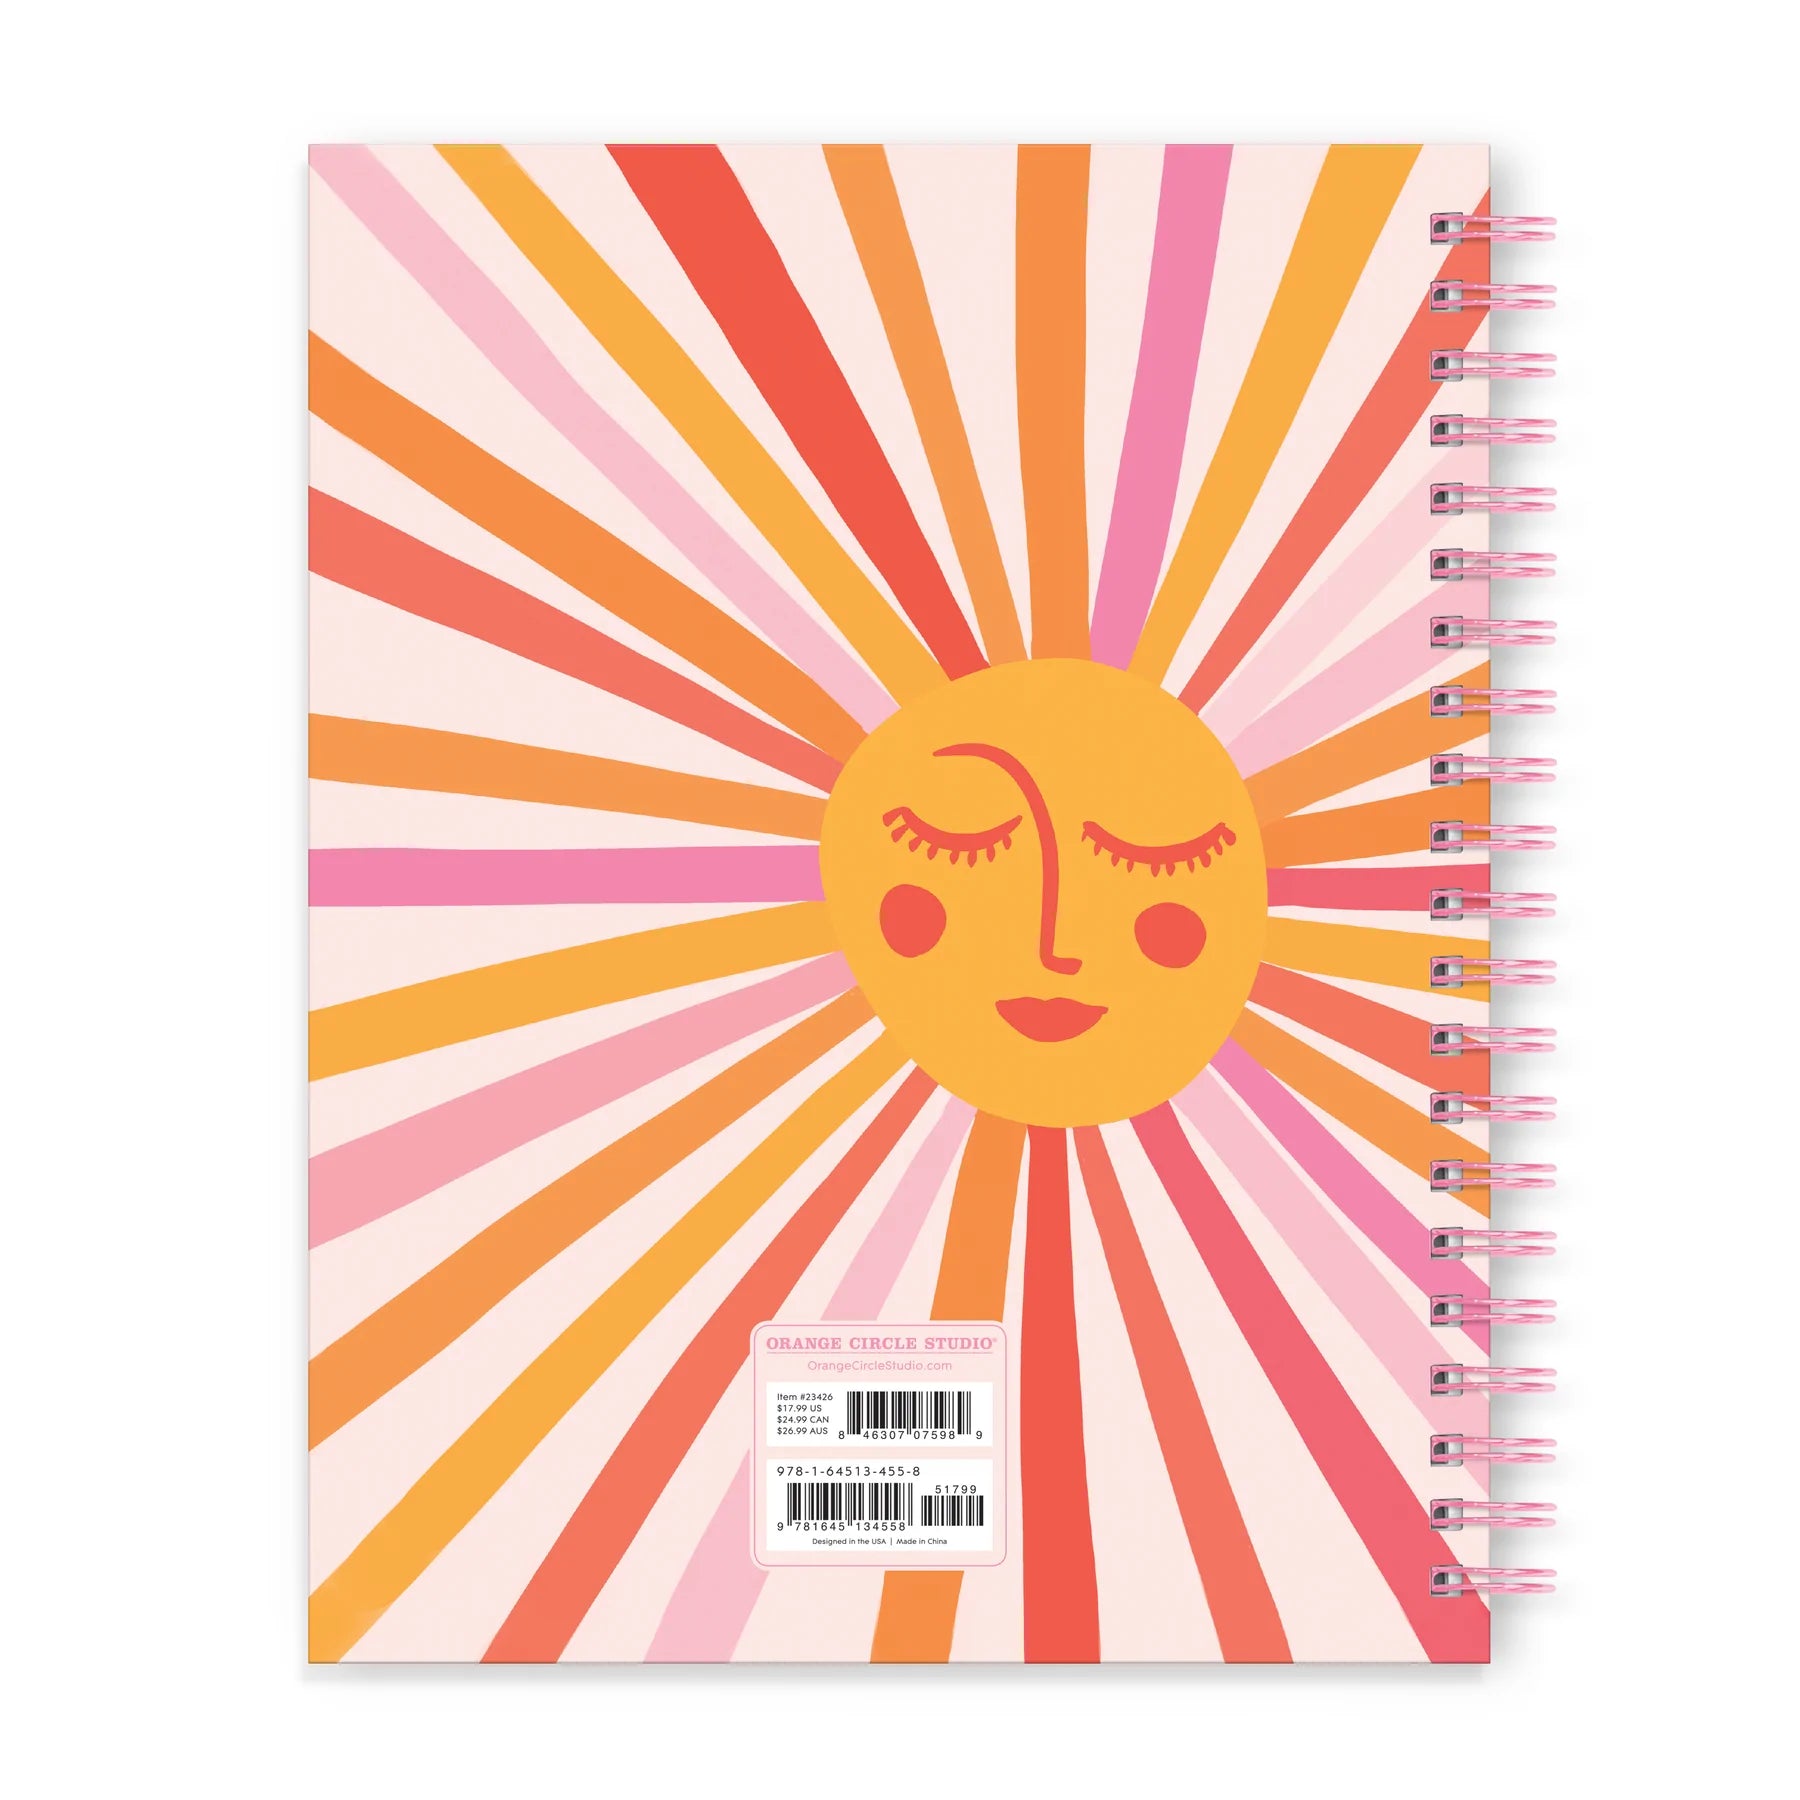 2023 Retro Sunshine by CatCoq (XL Spiral Weekly/Monthly Planner) - Diary/Planner